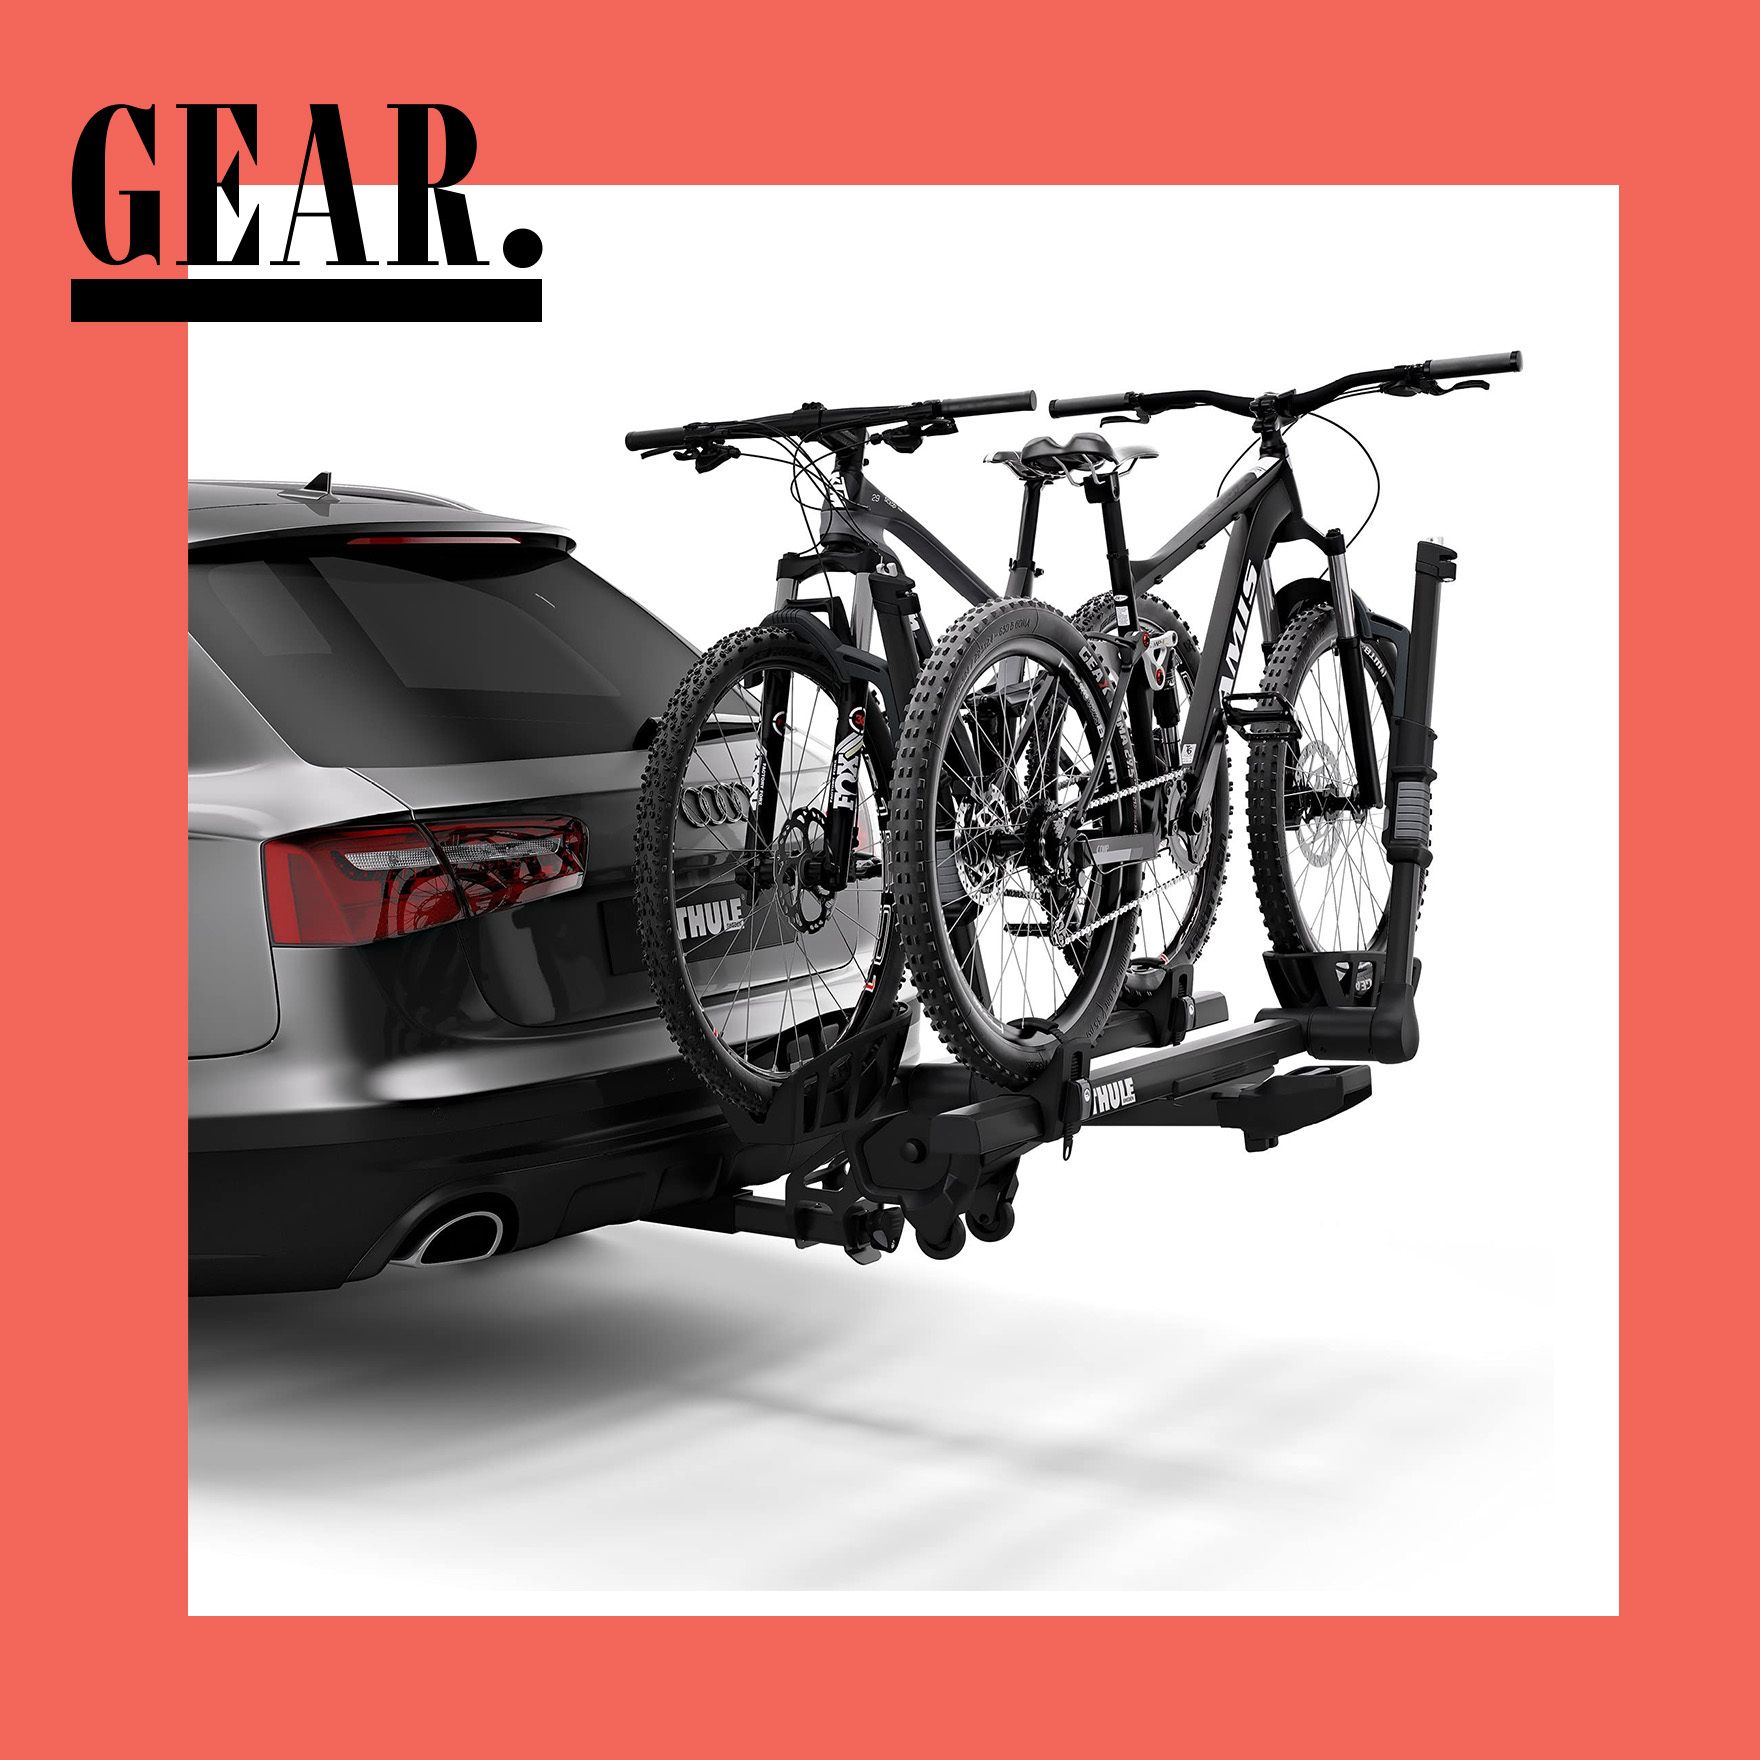 Take Your Bike on Your Next Road Trip with One of These Top Bike Racks for Cars & Trucks